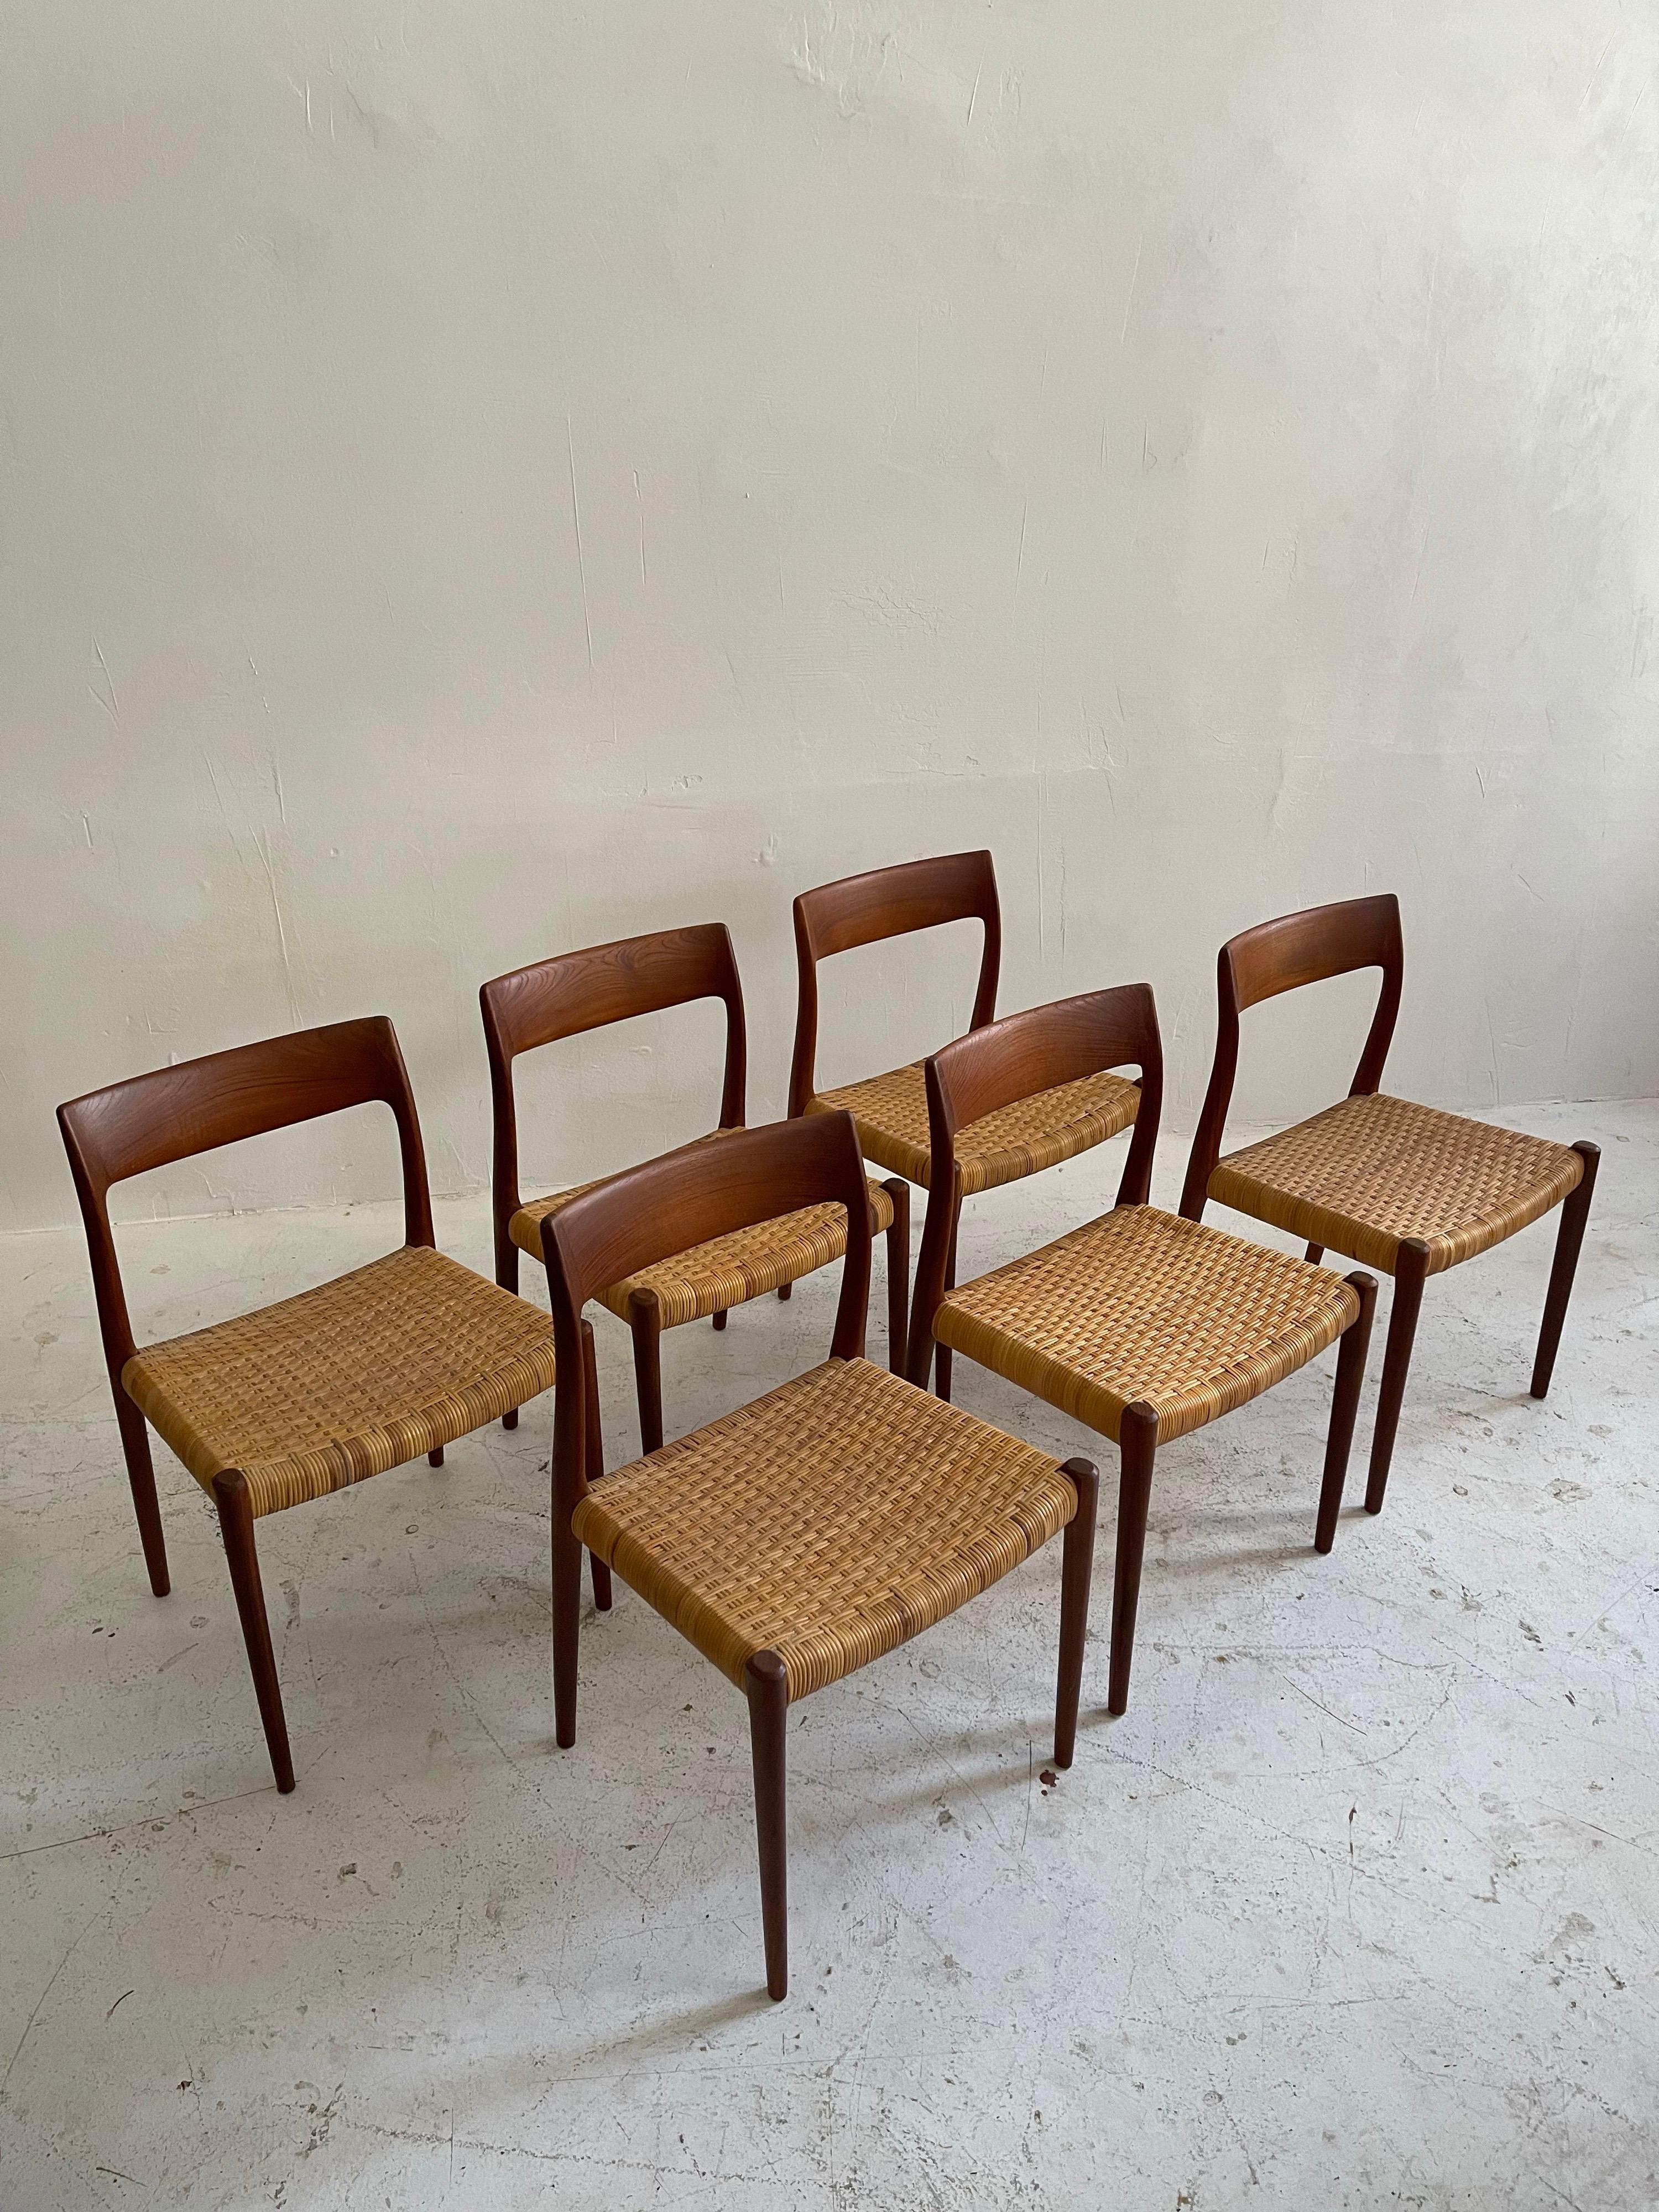 Early set of six Moller chairs No 77, Denmark 1958. Rare version with Hans Wegner Cane weaving on the seats.